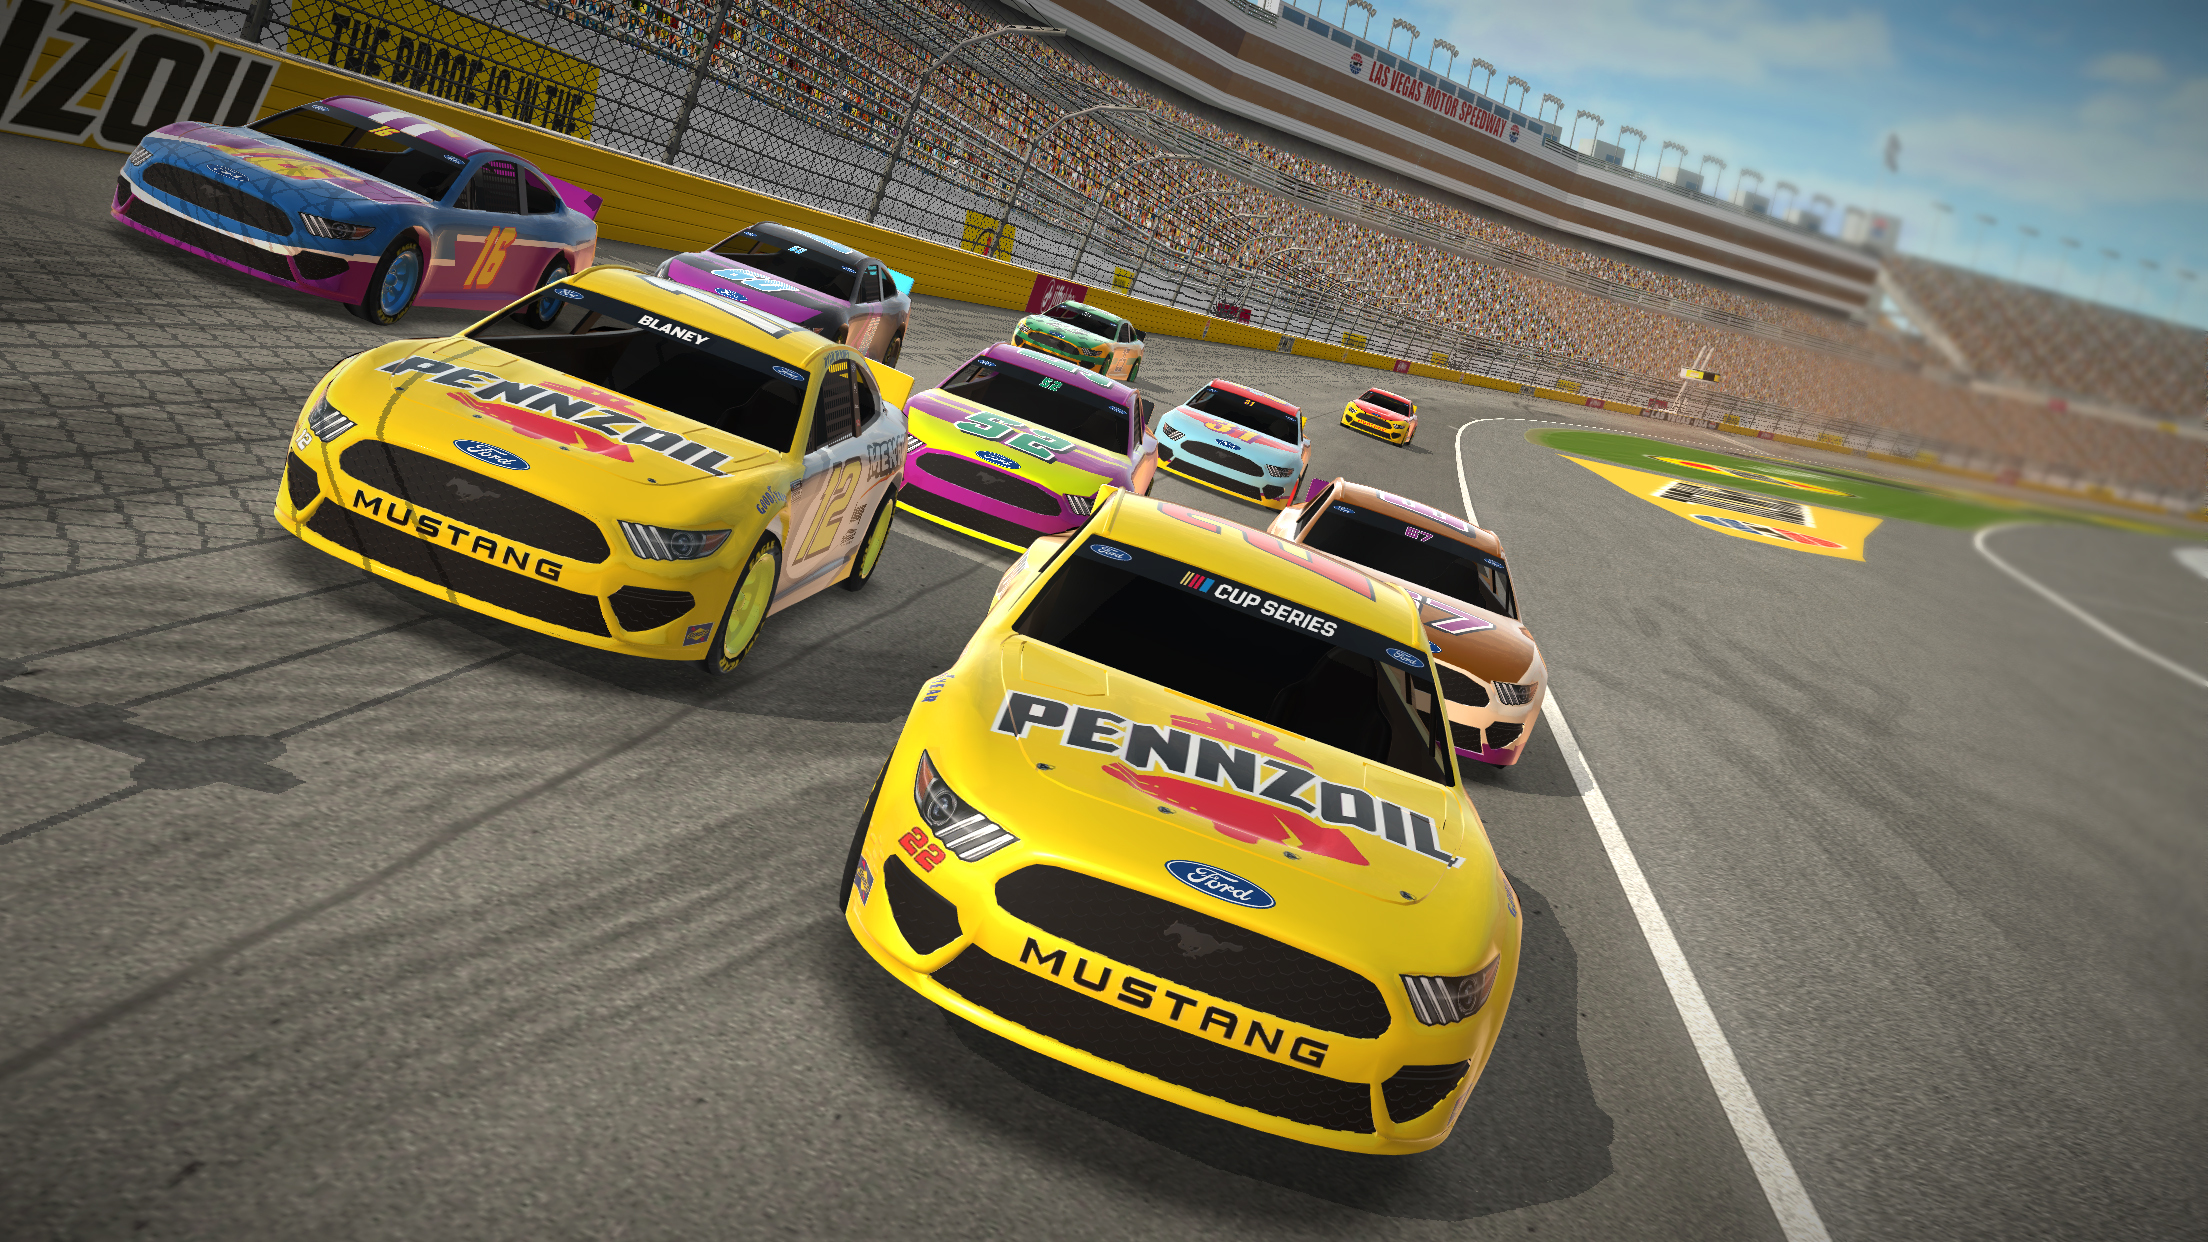 THE FOURTH ANNUAL PENNZOIL 400 PRESENTED BY JIFFY LUBE WILL IMMERSE FANS IN A LAS VEGAS MOTOR SPEEDWAY VIRTUAL EXPERIENCE